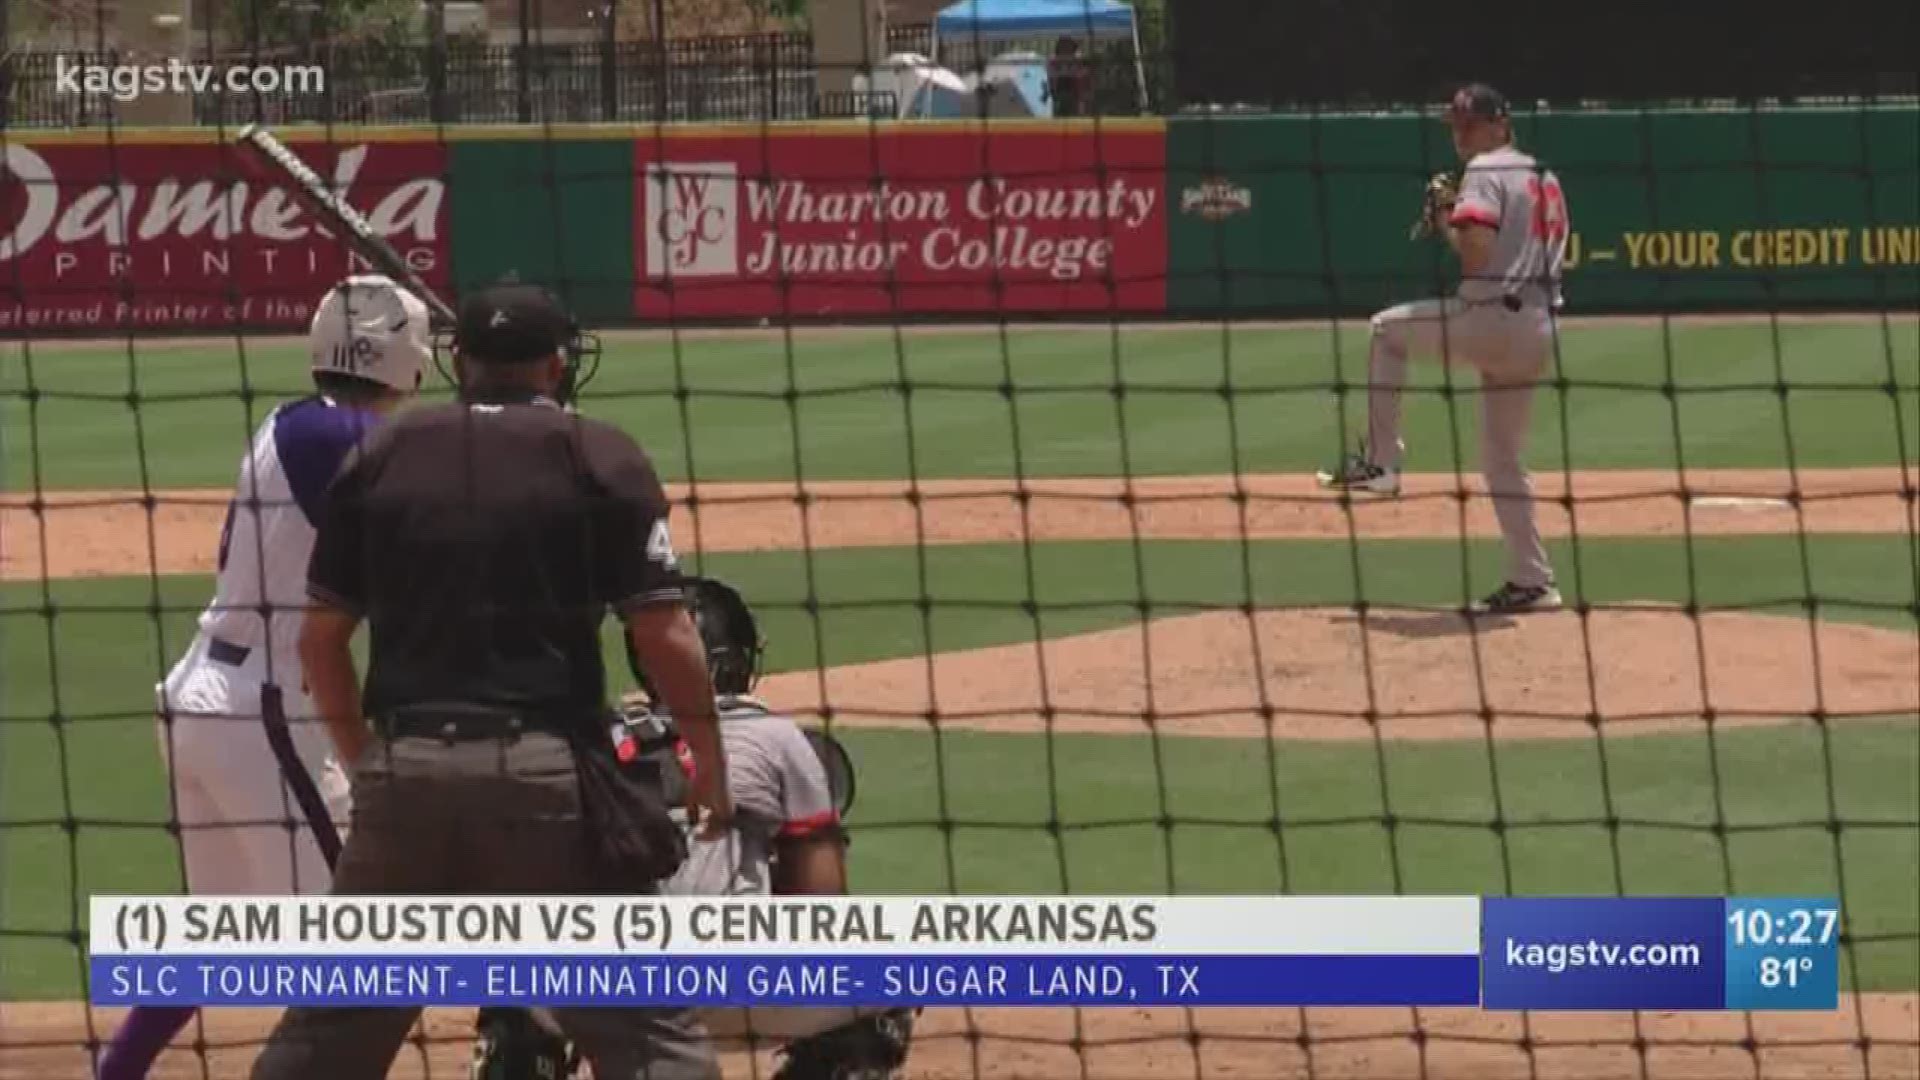 After losing in the opening round of the Southland Conference Tournament on Wednesday, top-seeded Sam Houston State rebounded to knock off Central Arkansas 4-2 on Thursday to stay alive.